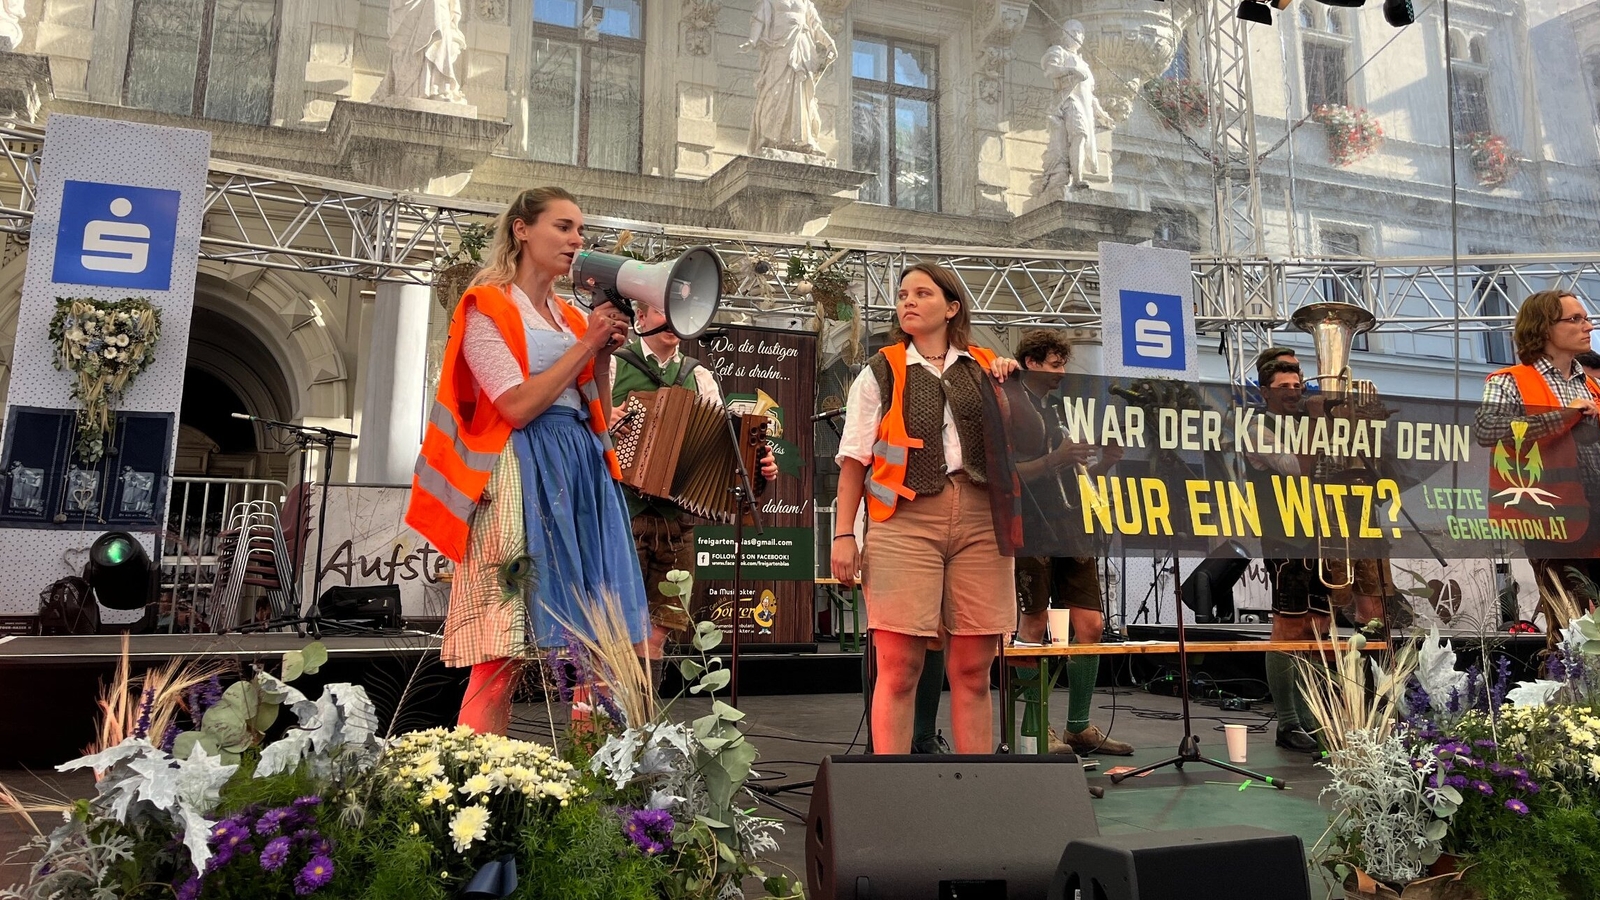 Celebrating Tradition and Climate Awareness at the ‘Aufsteirern’ Festival in Graz